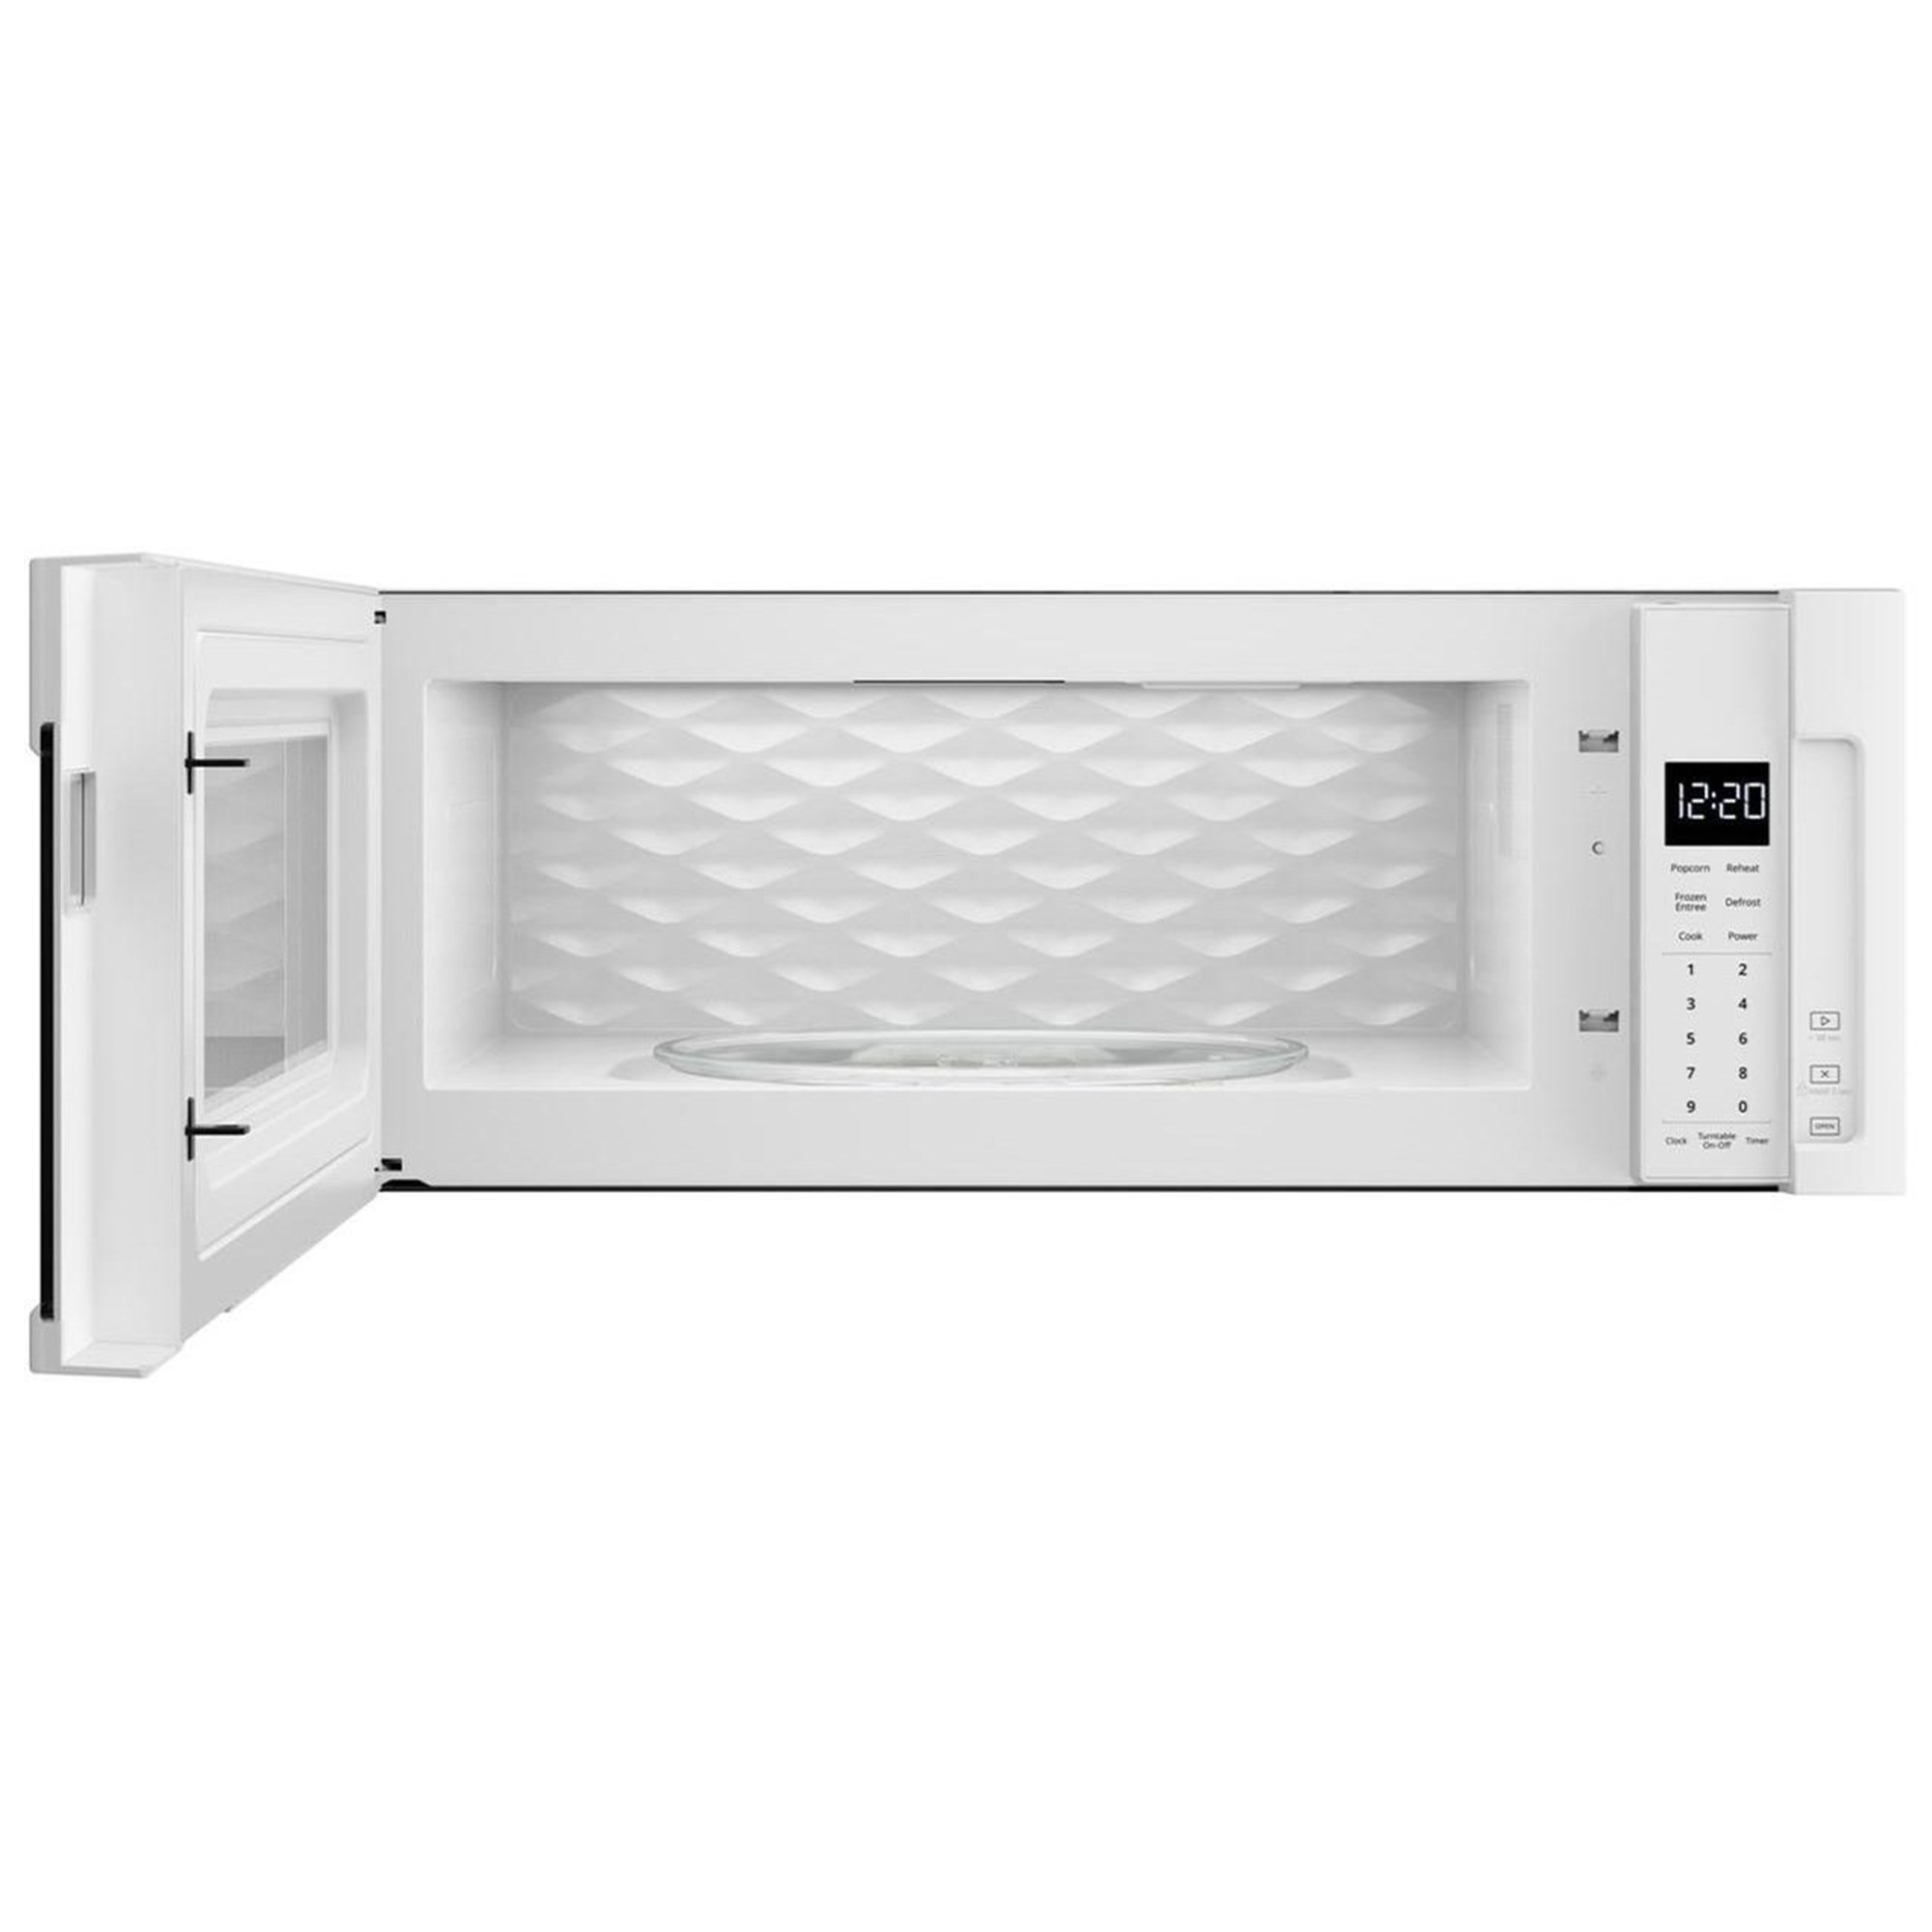 Whirlpool WML55011HW 1.1 cu. ft. Low Profile Microwave Hood Combination, Furniture and ApplianceMart